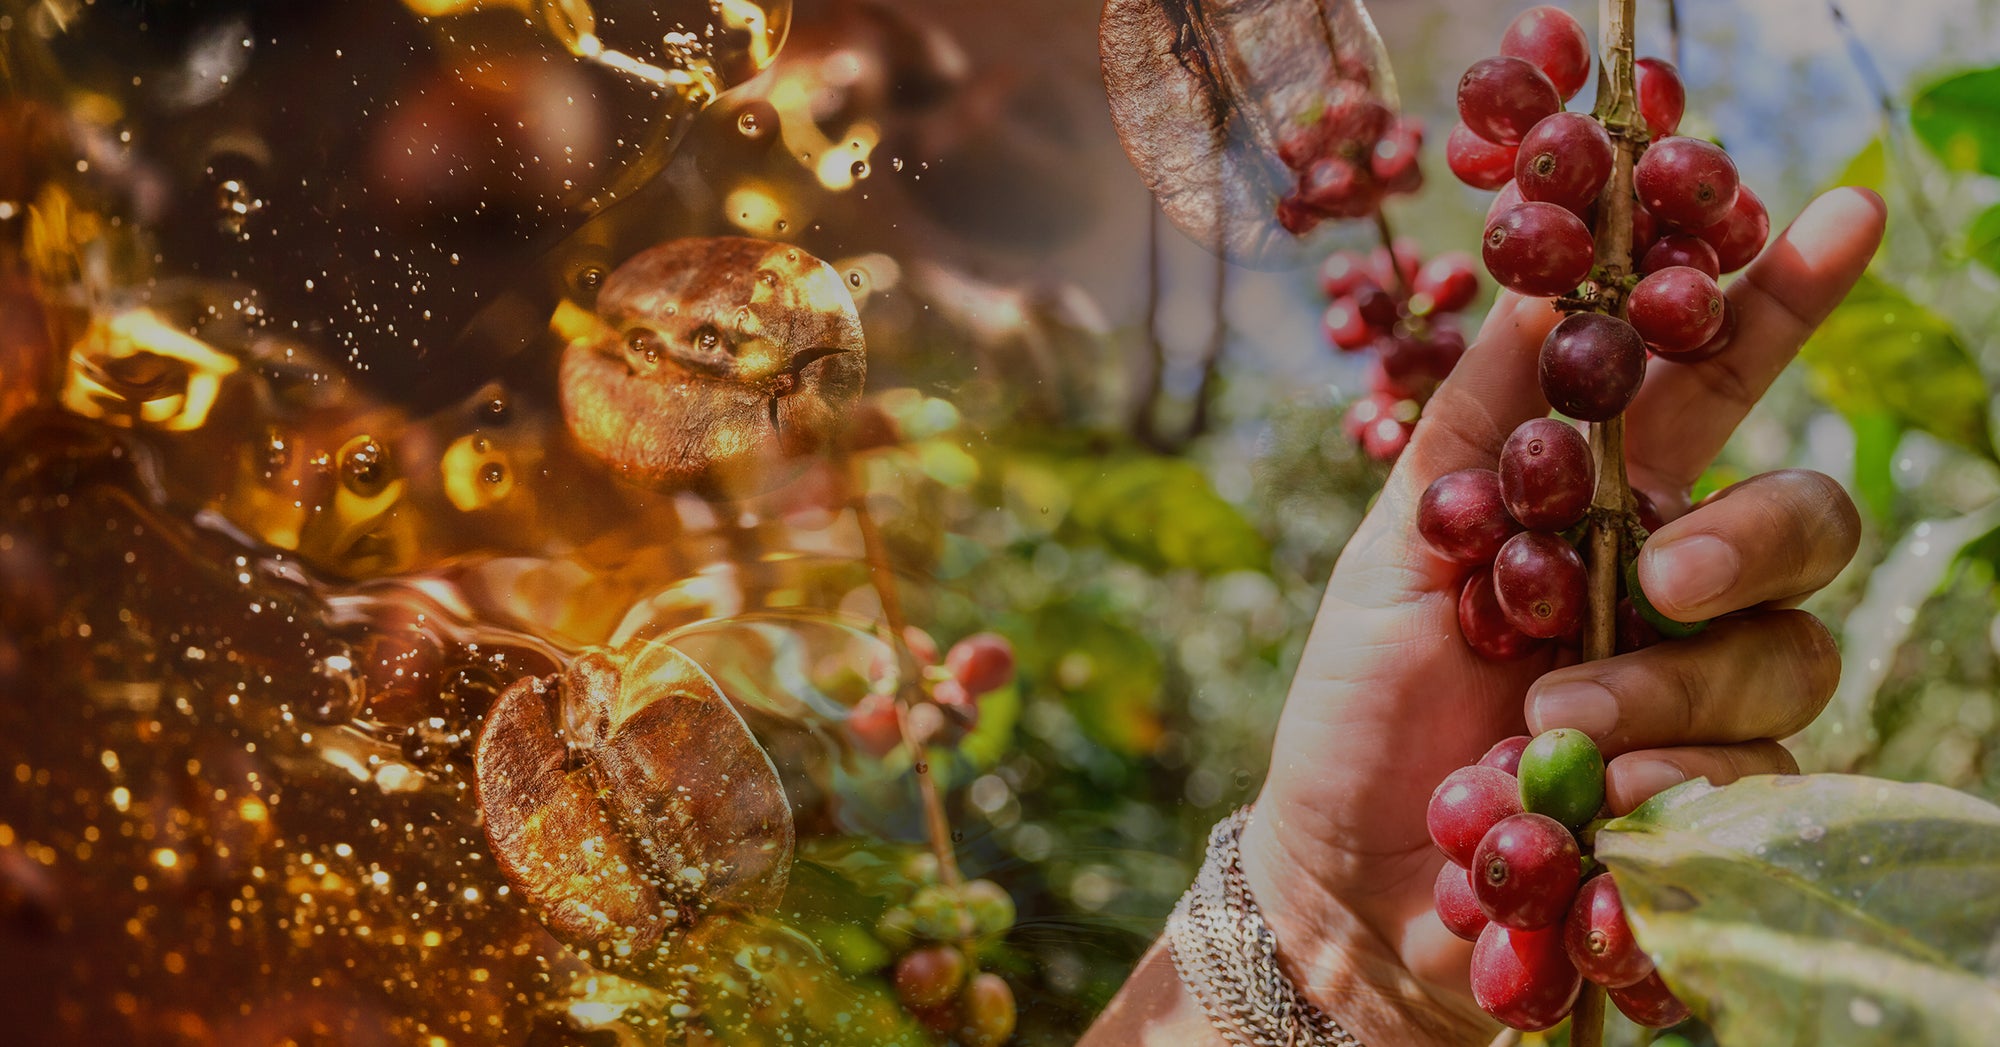 Image collage of liquid bourbon splashing on coffee beans and coffee fruit growing on a branch.